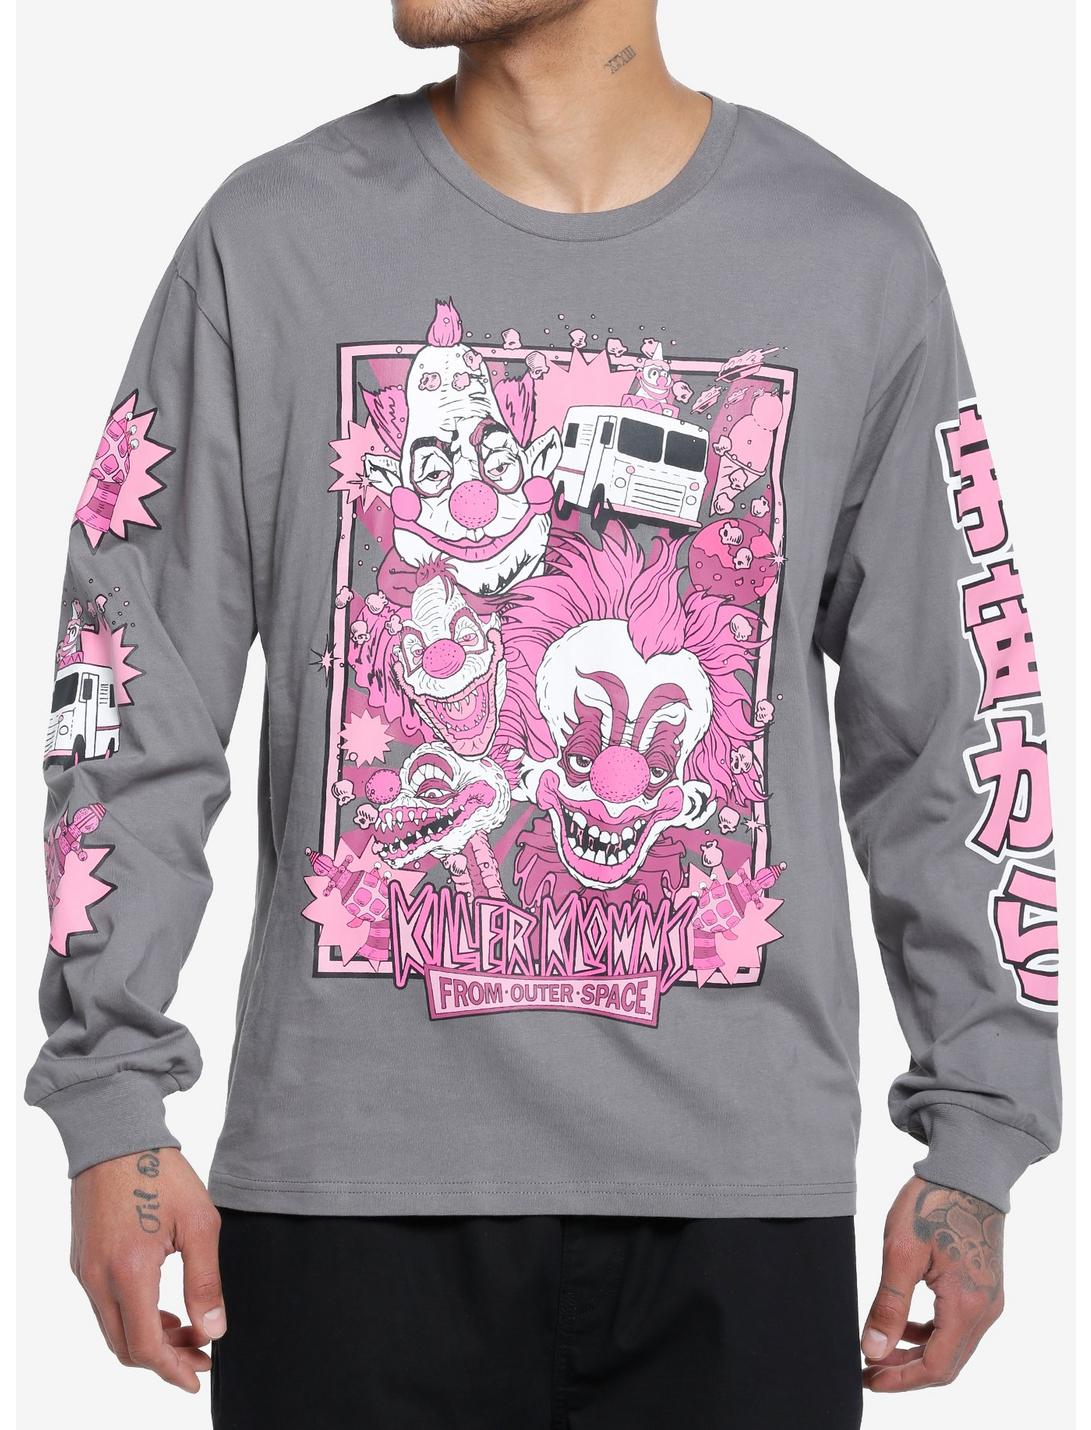 Killer Klowns From Outer Space Pink Tonal Long-Sleeve T-Shirt, GREY, hi-res